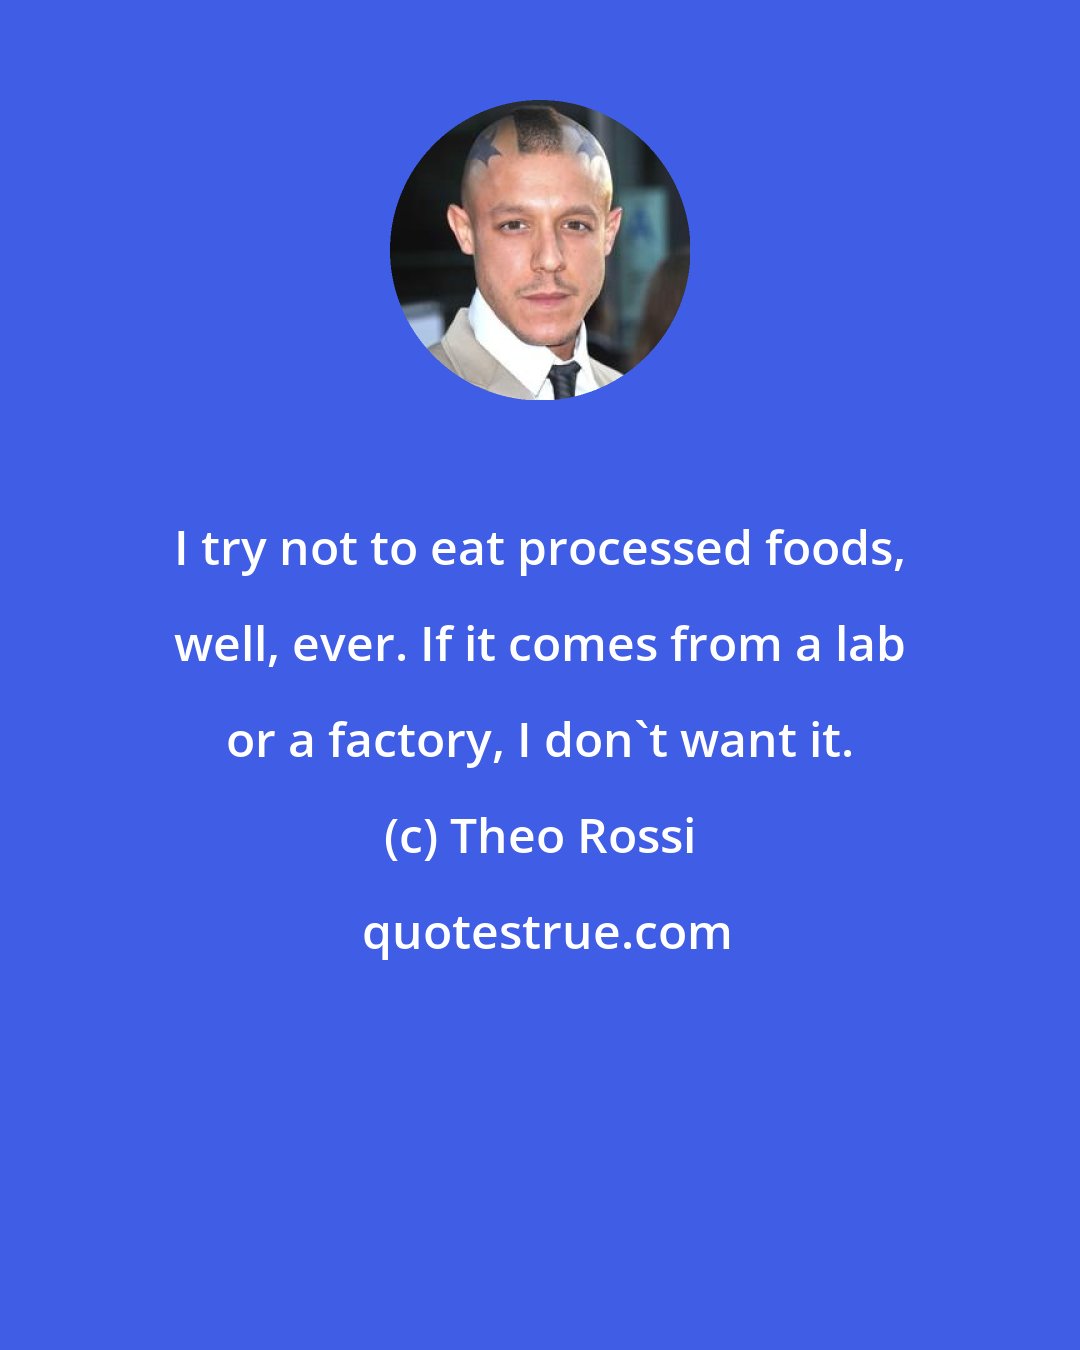 Theo Rossi: I try not to eat processed foods, well, ever. If it comes from a lab or a factory, I don't want it.